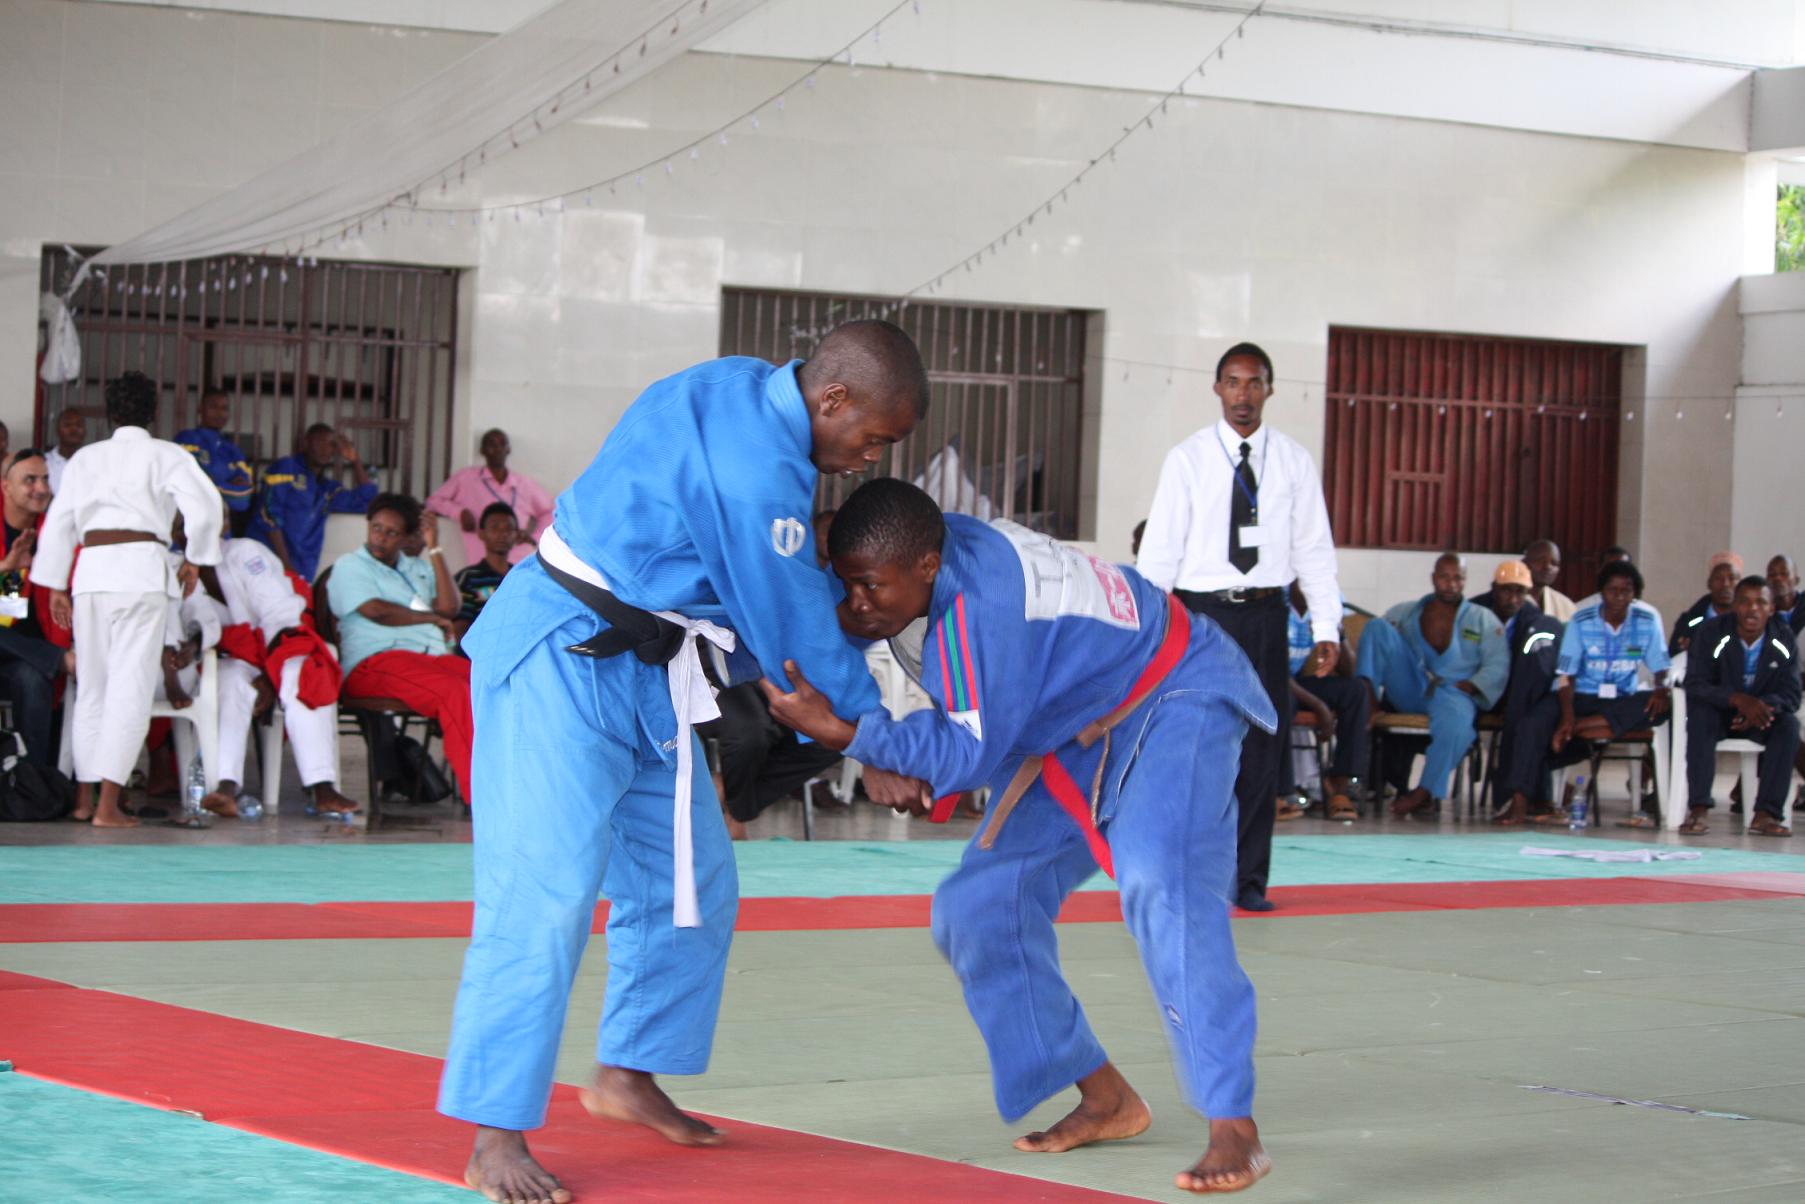 Pictures of the competition - The 5th East Africa Judo Championship 2011 -Men60kg～男子60kg級_a0088841_11424854.jpg